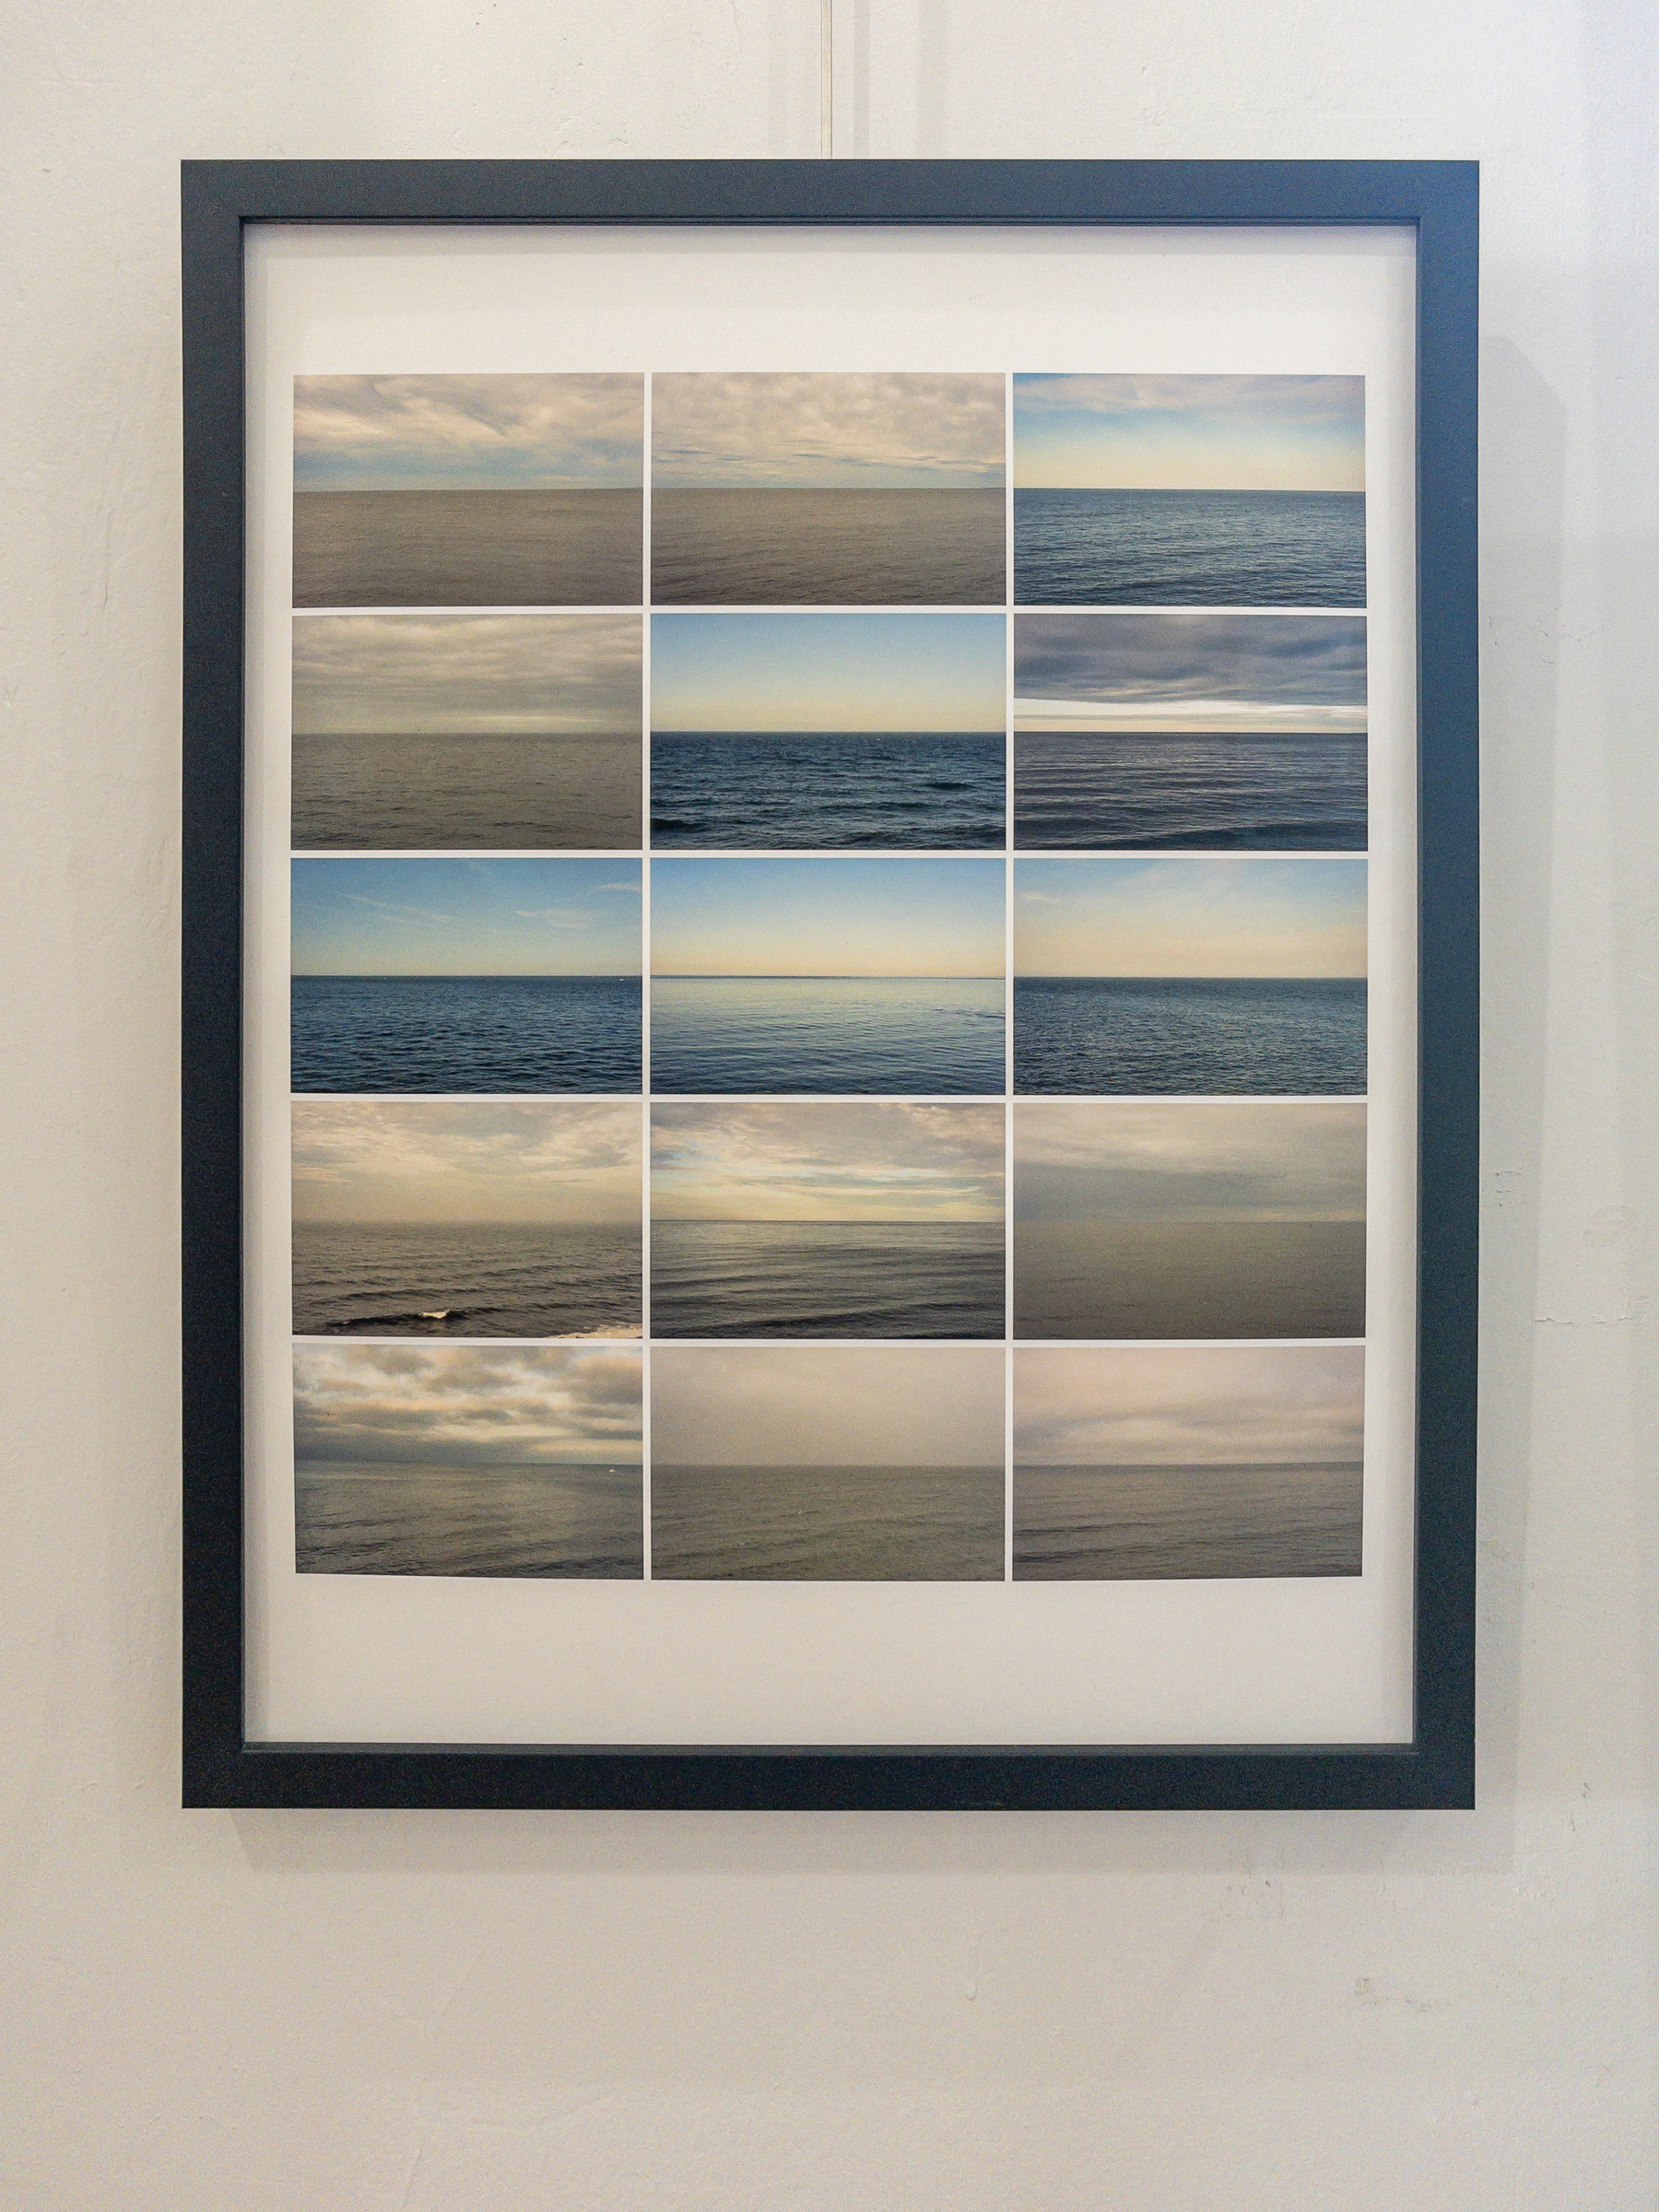 Framed photograph grid of the ocean horizon hanging on a wall in an exhibition.